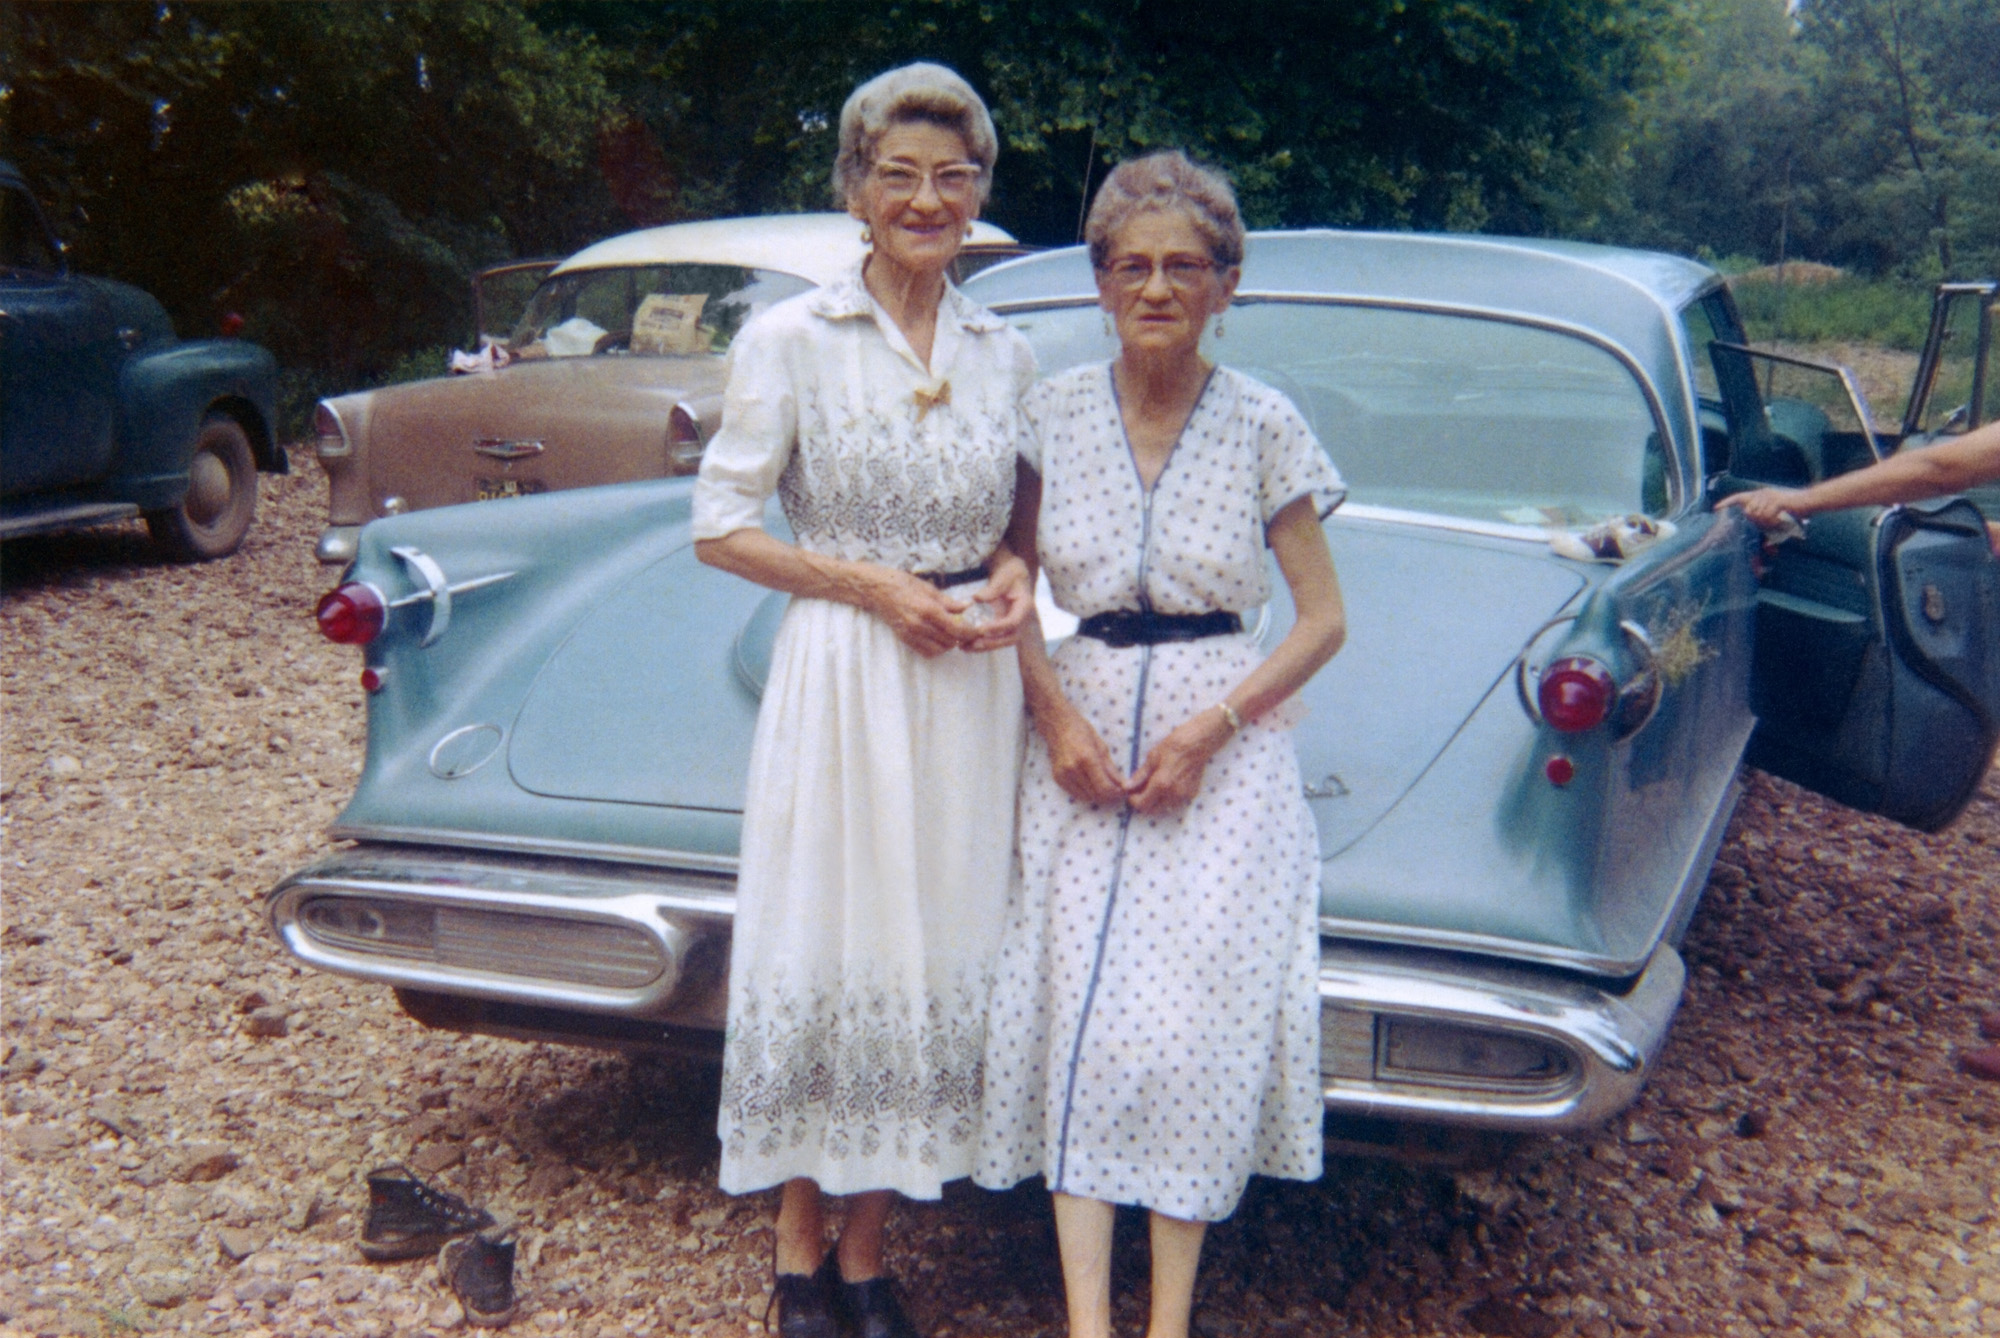 My sister-in-law Gimi's maternal grandmother and her identical twin pose with a 1958 Imperial in this Kodacolor print from July 1959. That's all we know for sure, although Gimi believes this is in the Ozarks of Missouri. Other elements give rise to speculation: the right taillight assembly suggests a close encounter with some native plant life, perhaps on a narrow, winding road that brought us hither. The pointing finger I like to think indicates a voice exclaiming "Get those saddle shoes OFF the Imperial!" As for the other orphan footwear, I just want to say I'd rather not look under the Imperial. On a happier note, a 1955 Chevrolet. View full size.